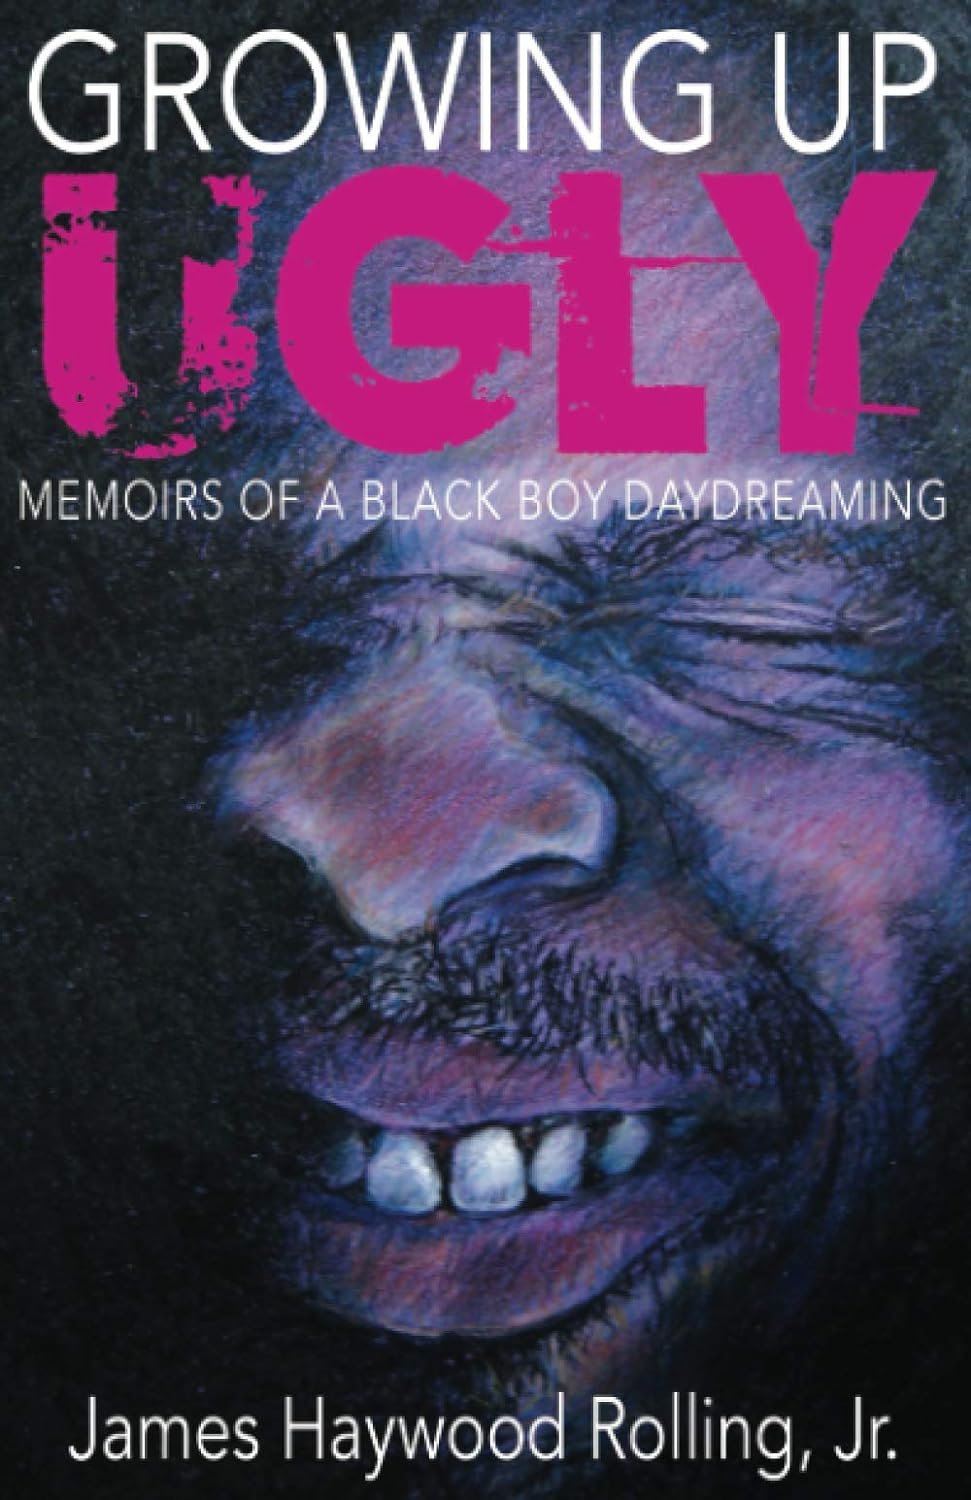 Growing Up Ugly: Memoirs of a Black Boy Daydreaming